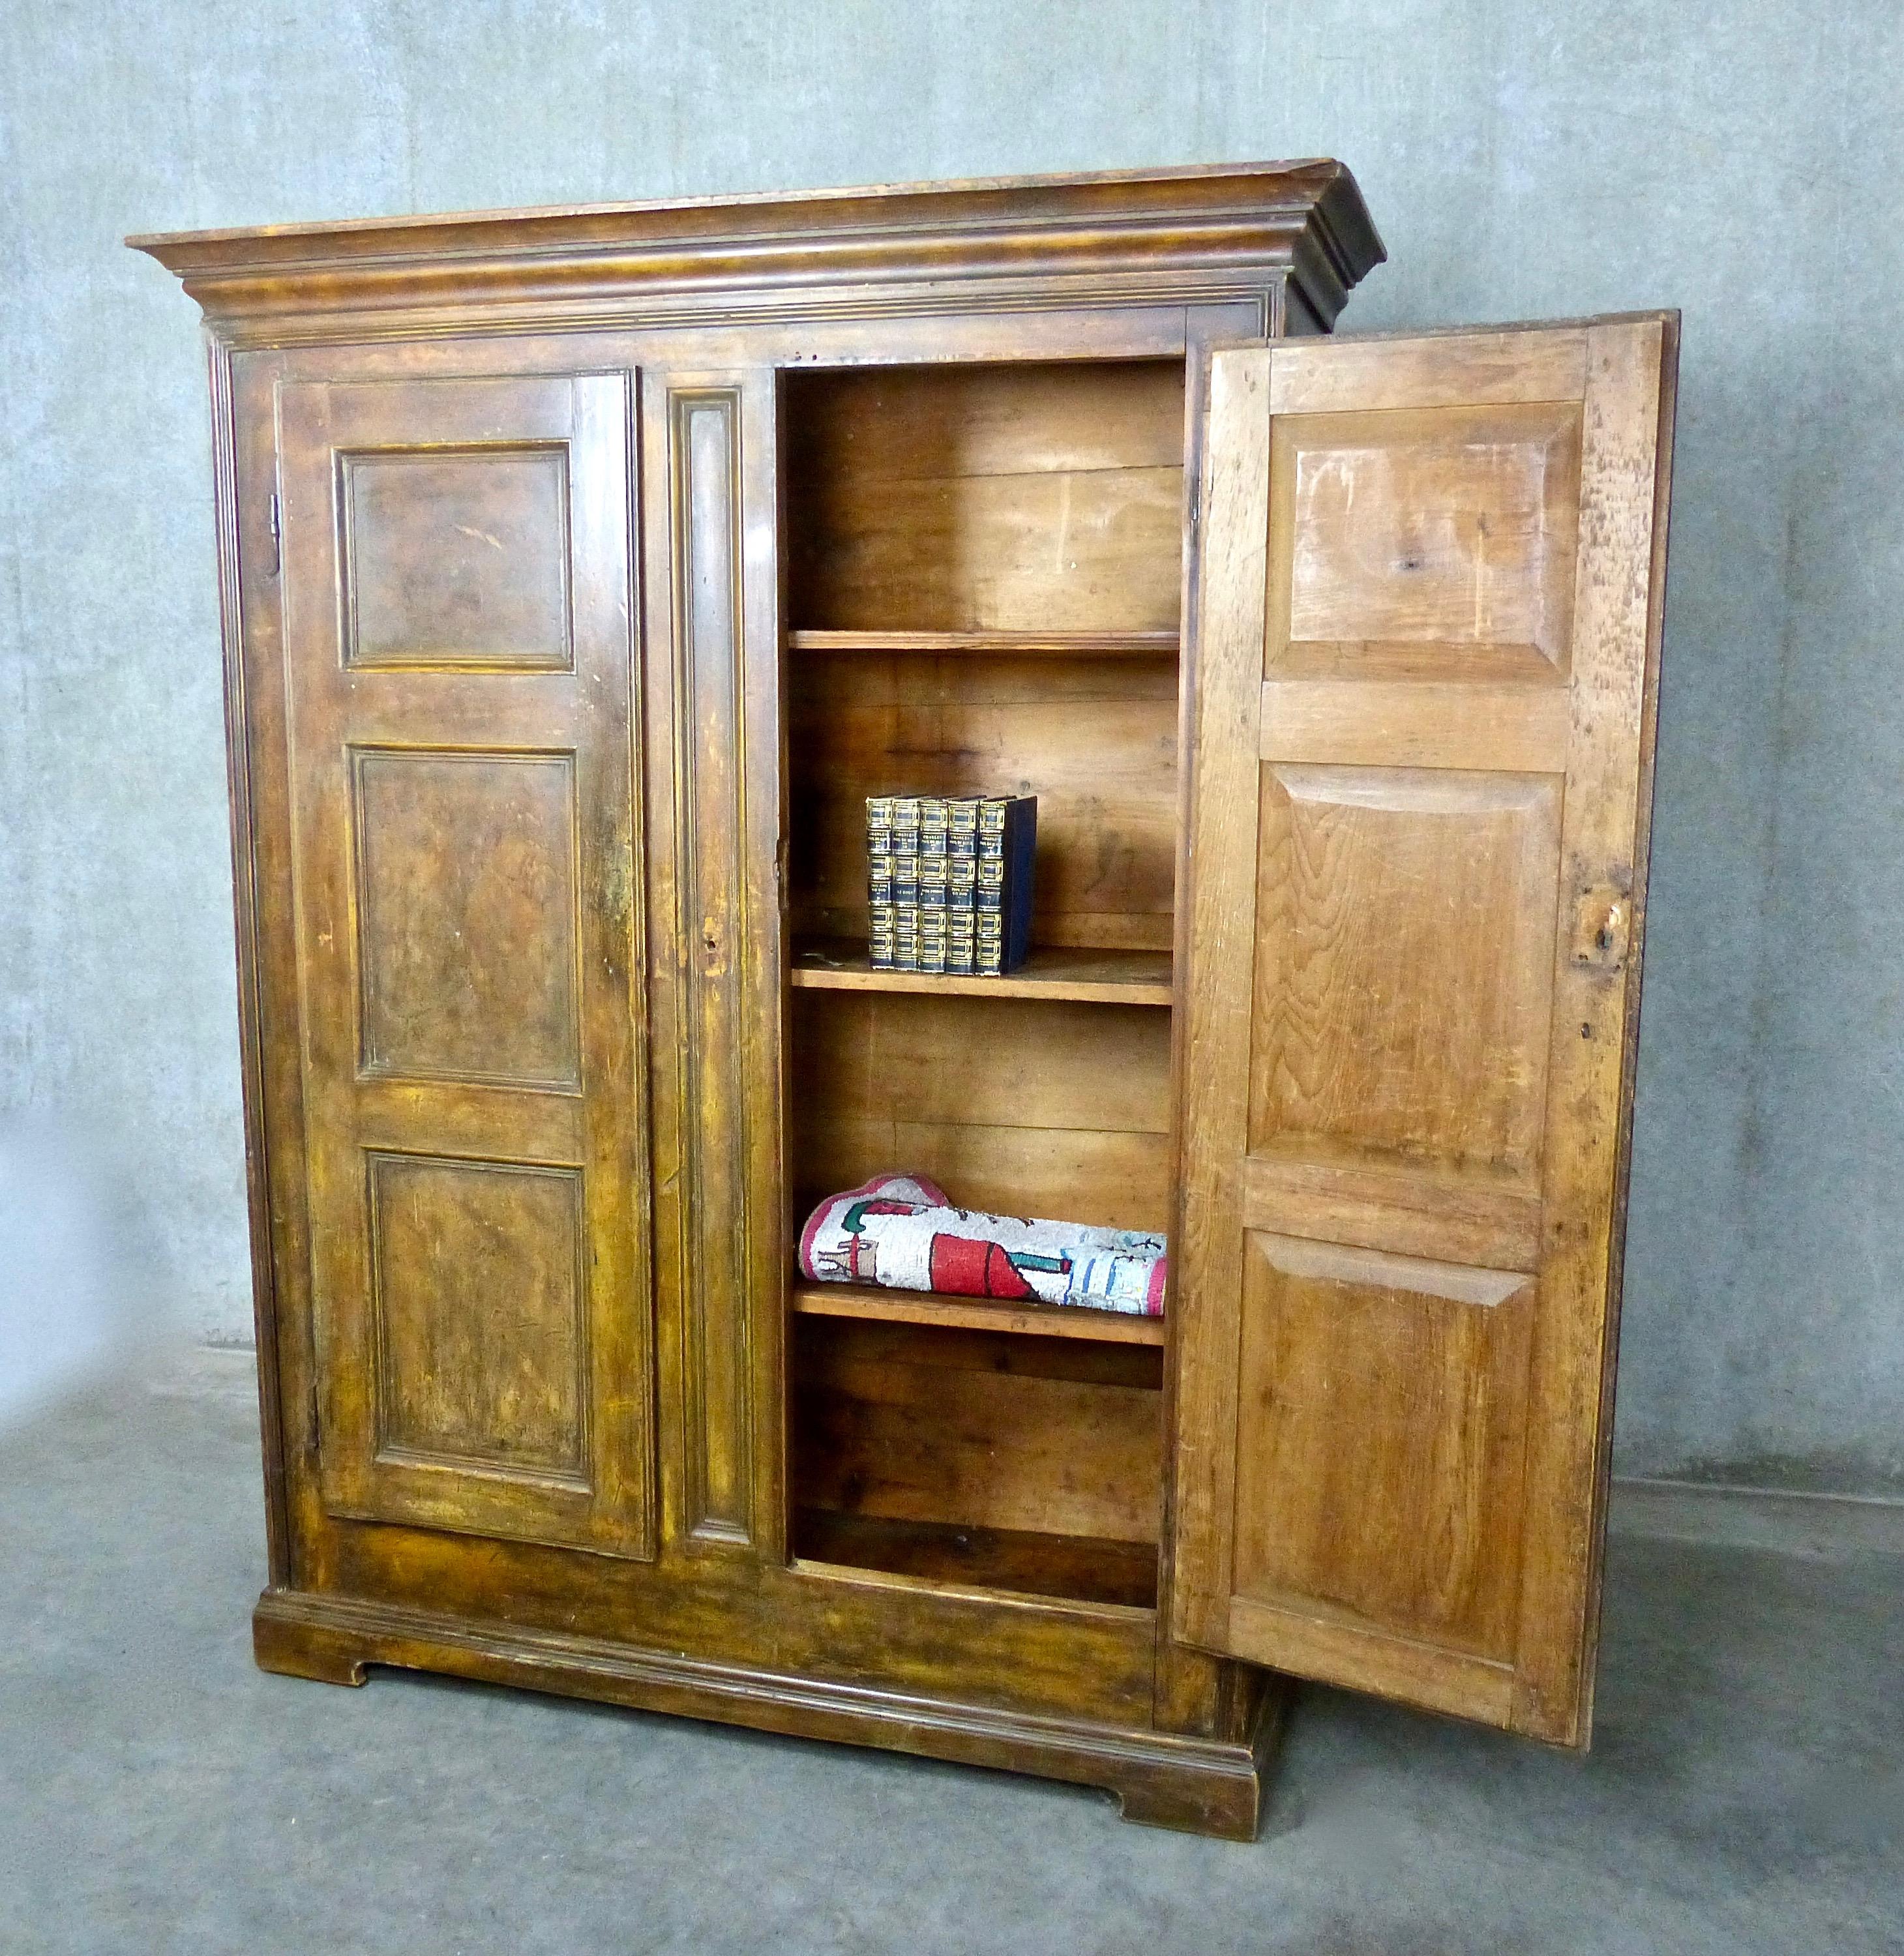 19th century six-paneled Quebec armoire with original ‘rat-tail’ hinges. Hand painted 200 years ago with a faux burled oak hand painted finish over pine wood. Three original interior shelves. Use as an armoire, library, or linen cabinet.